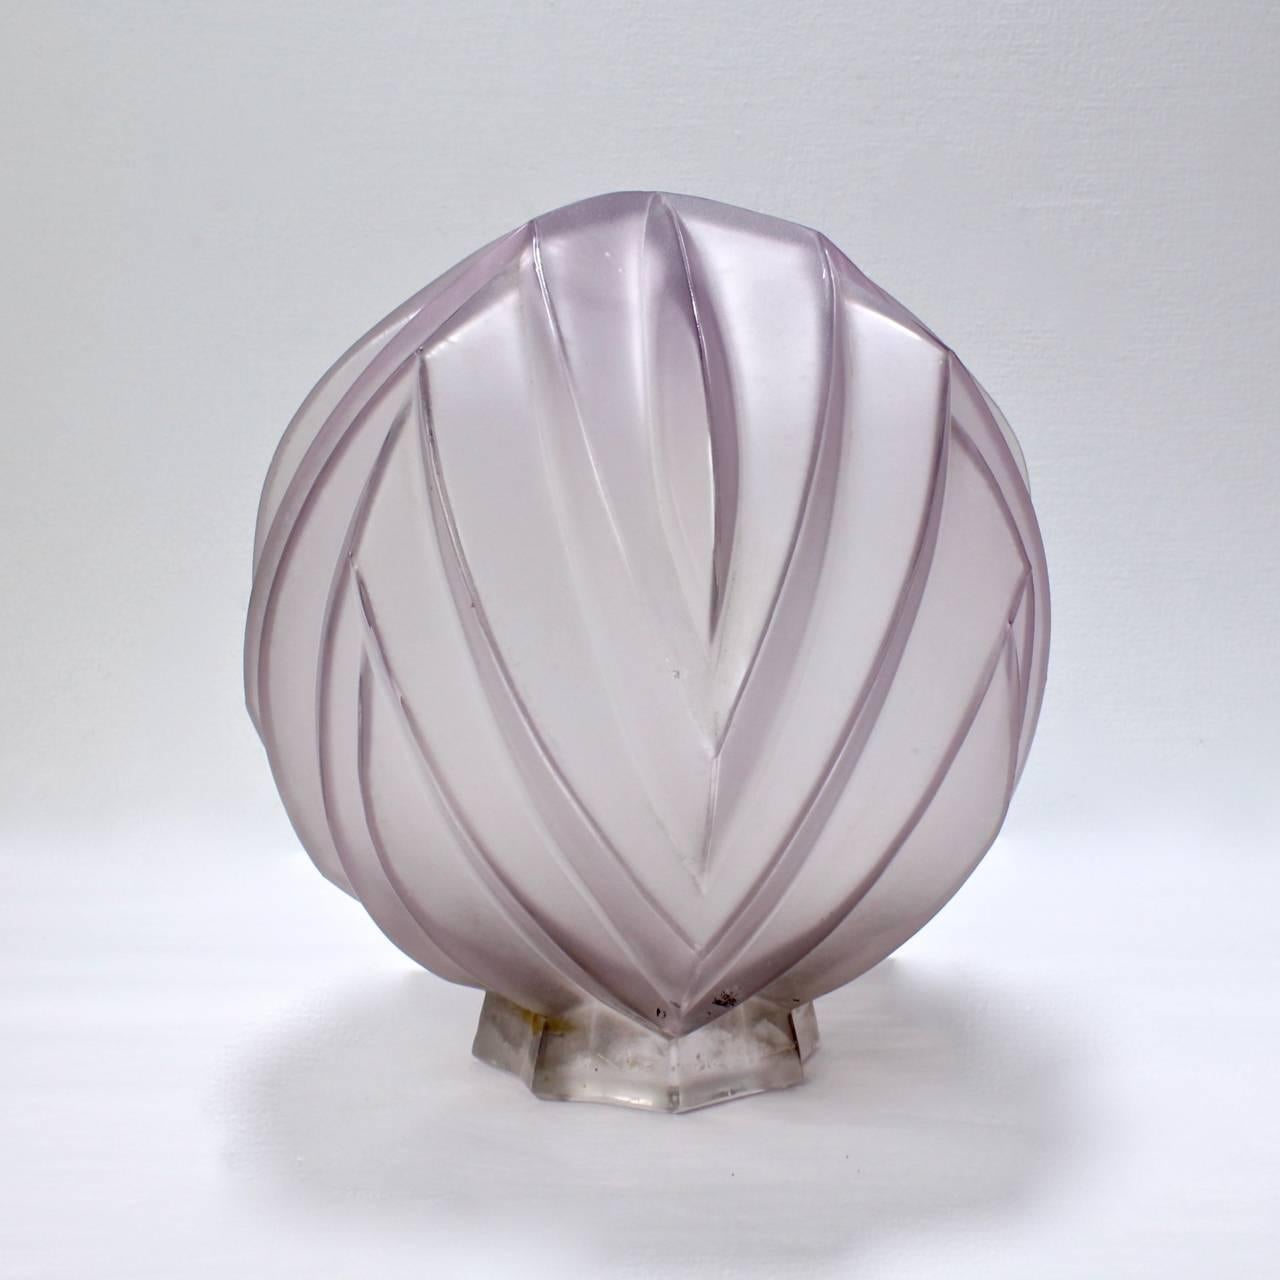 A rare period French Art Deco frosted globe from lampshade by Sabino for the French Market.

With a grey to purple frosted patina and a geometric or prism design.

The fitter neck bears a raised Sabino, Paris factory mark.

Measure: Diameter